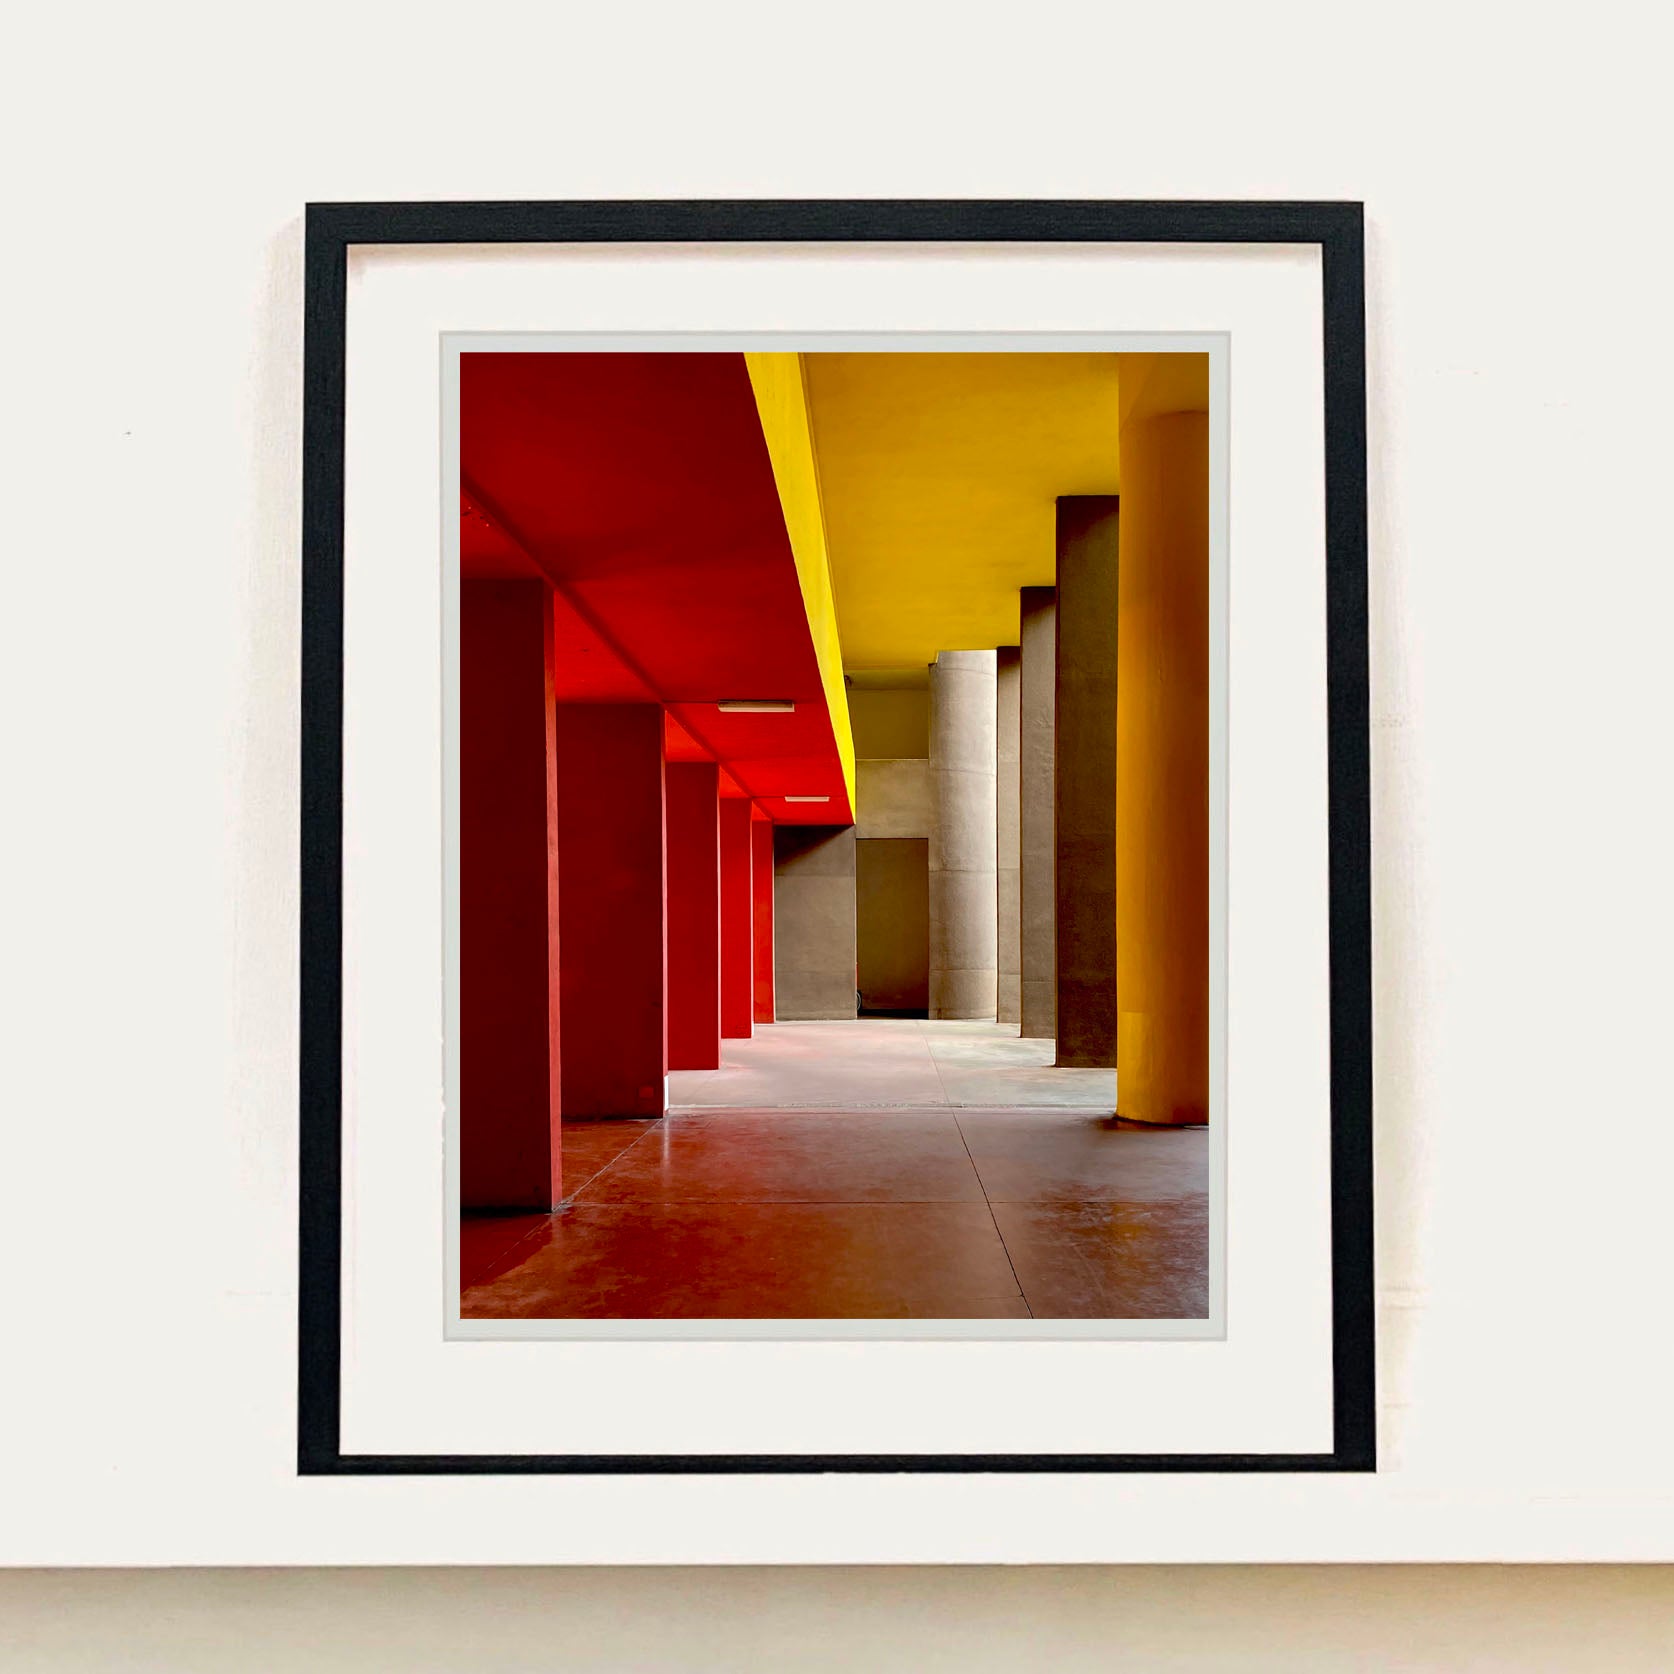 Monte Amiata housing, Gallaratese Quarter, Milan. Red and yellow brutalist architecture photograph by Richard Heeps framed in black.